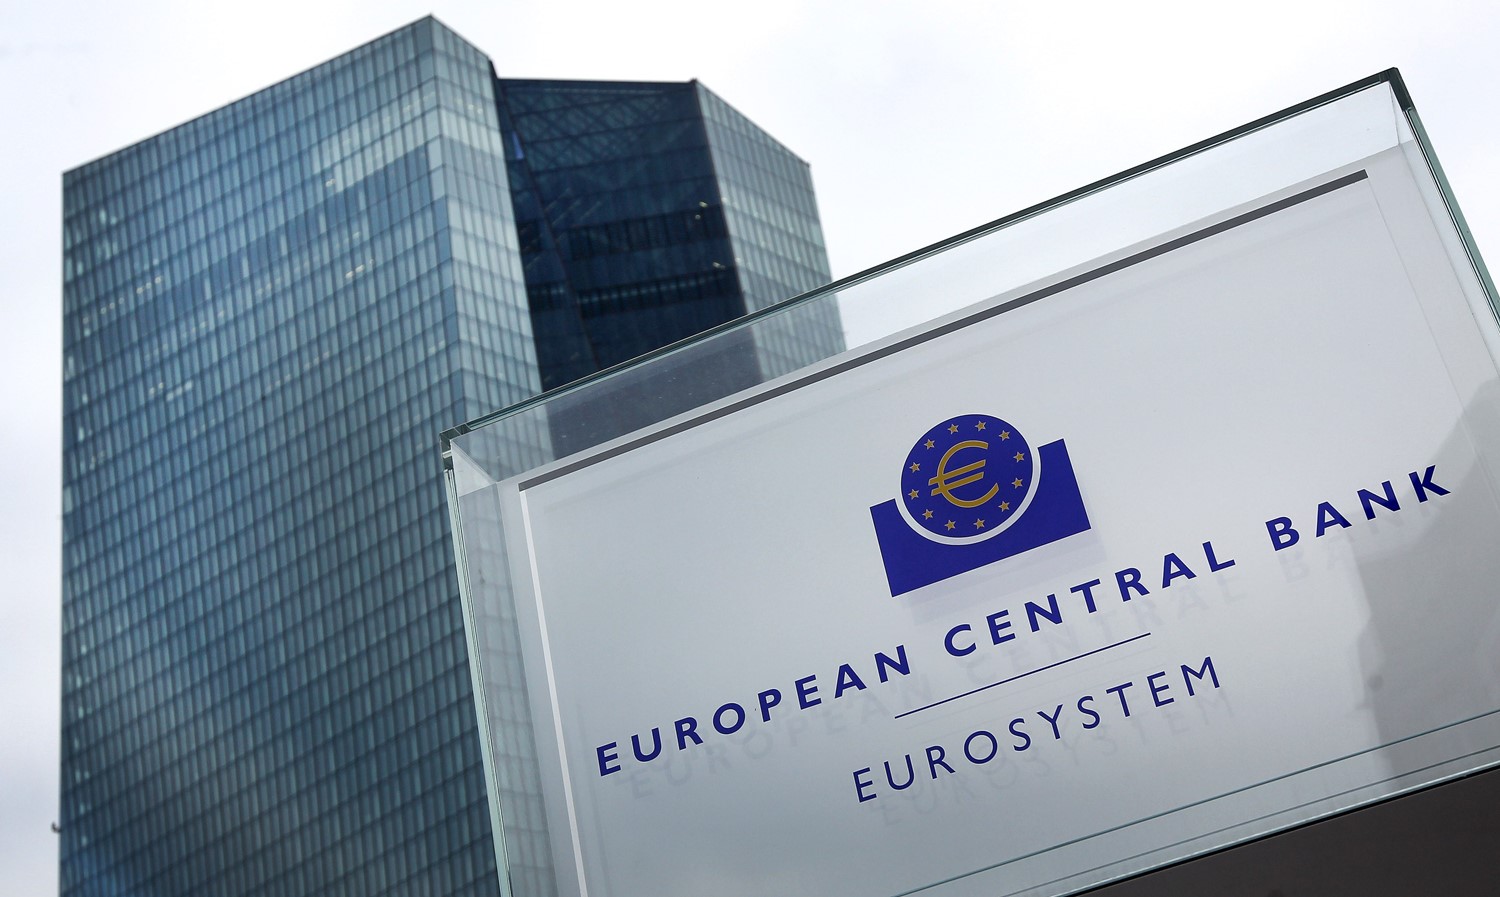 The European Central amends inflation target and enhances the role of climate